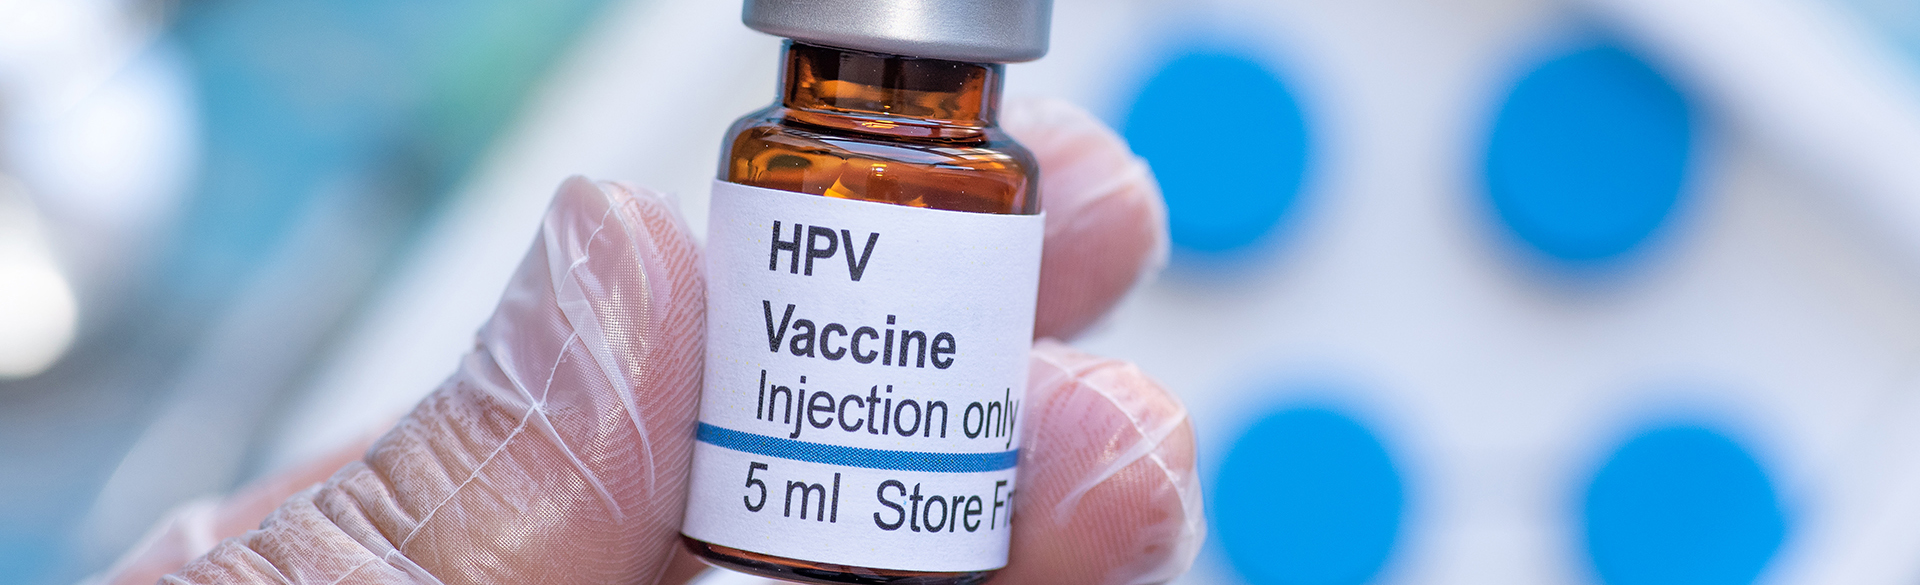 Hand holding a bottle of liquid HPV vaccine